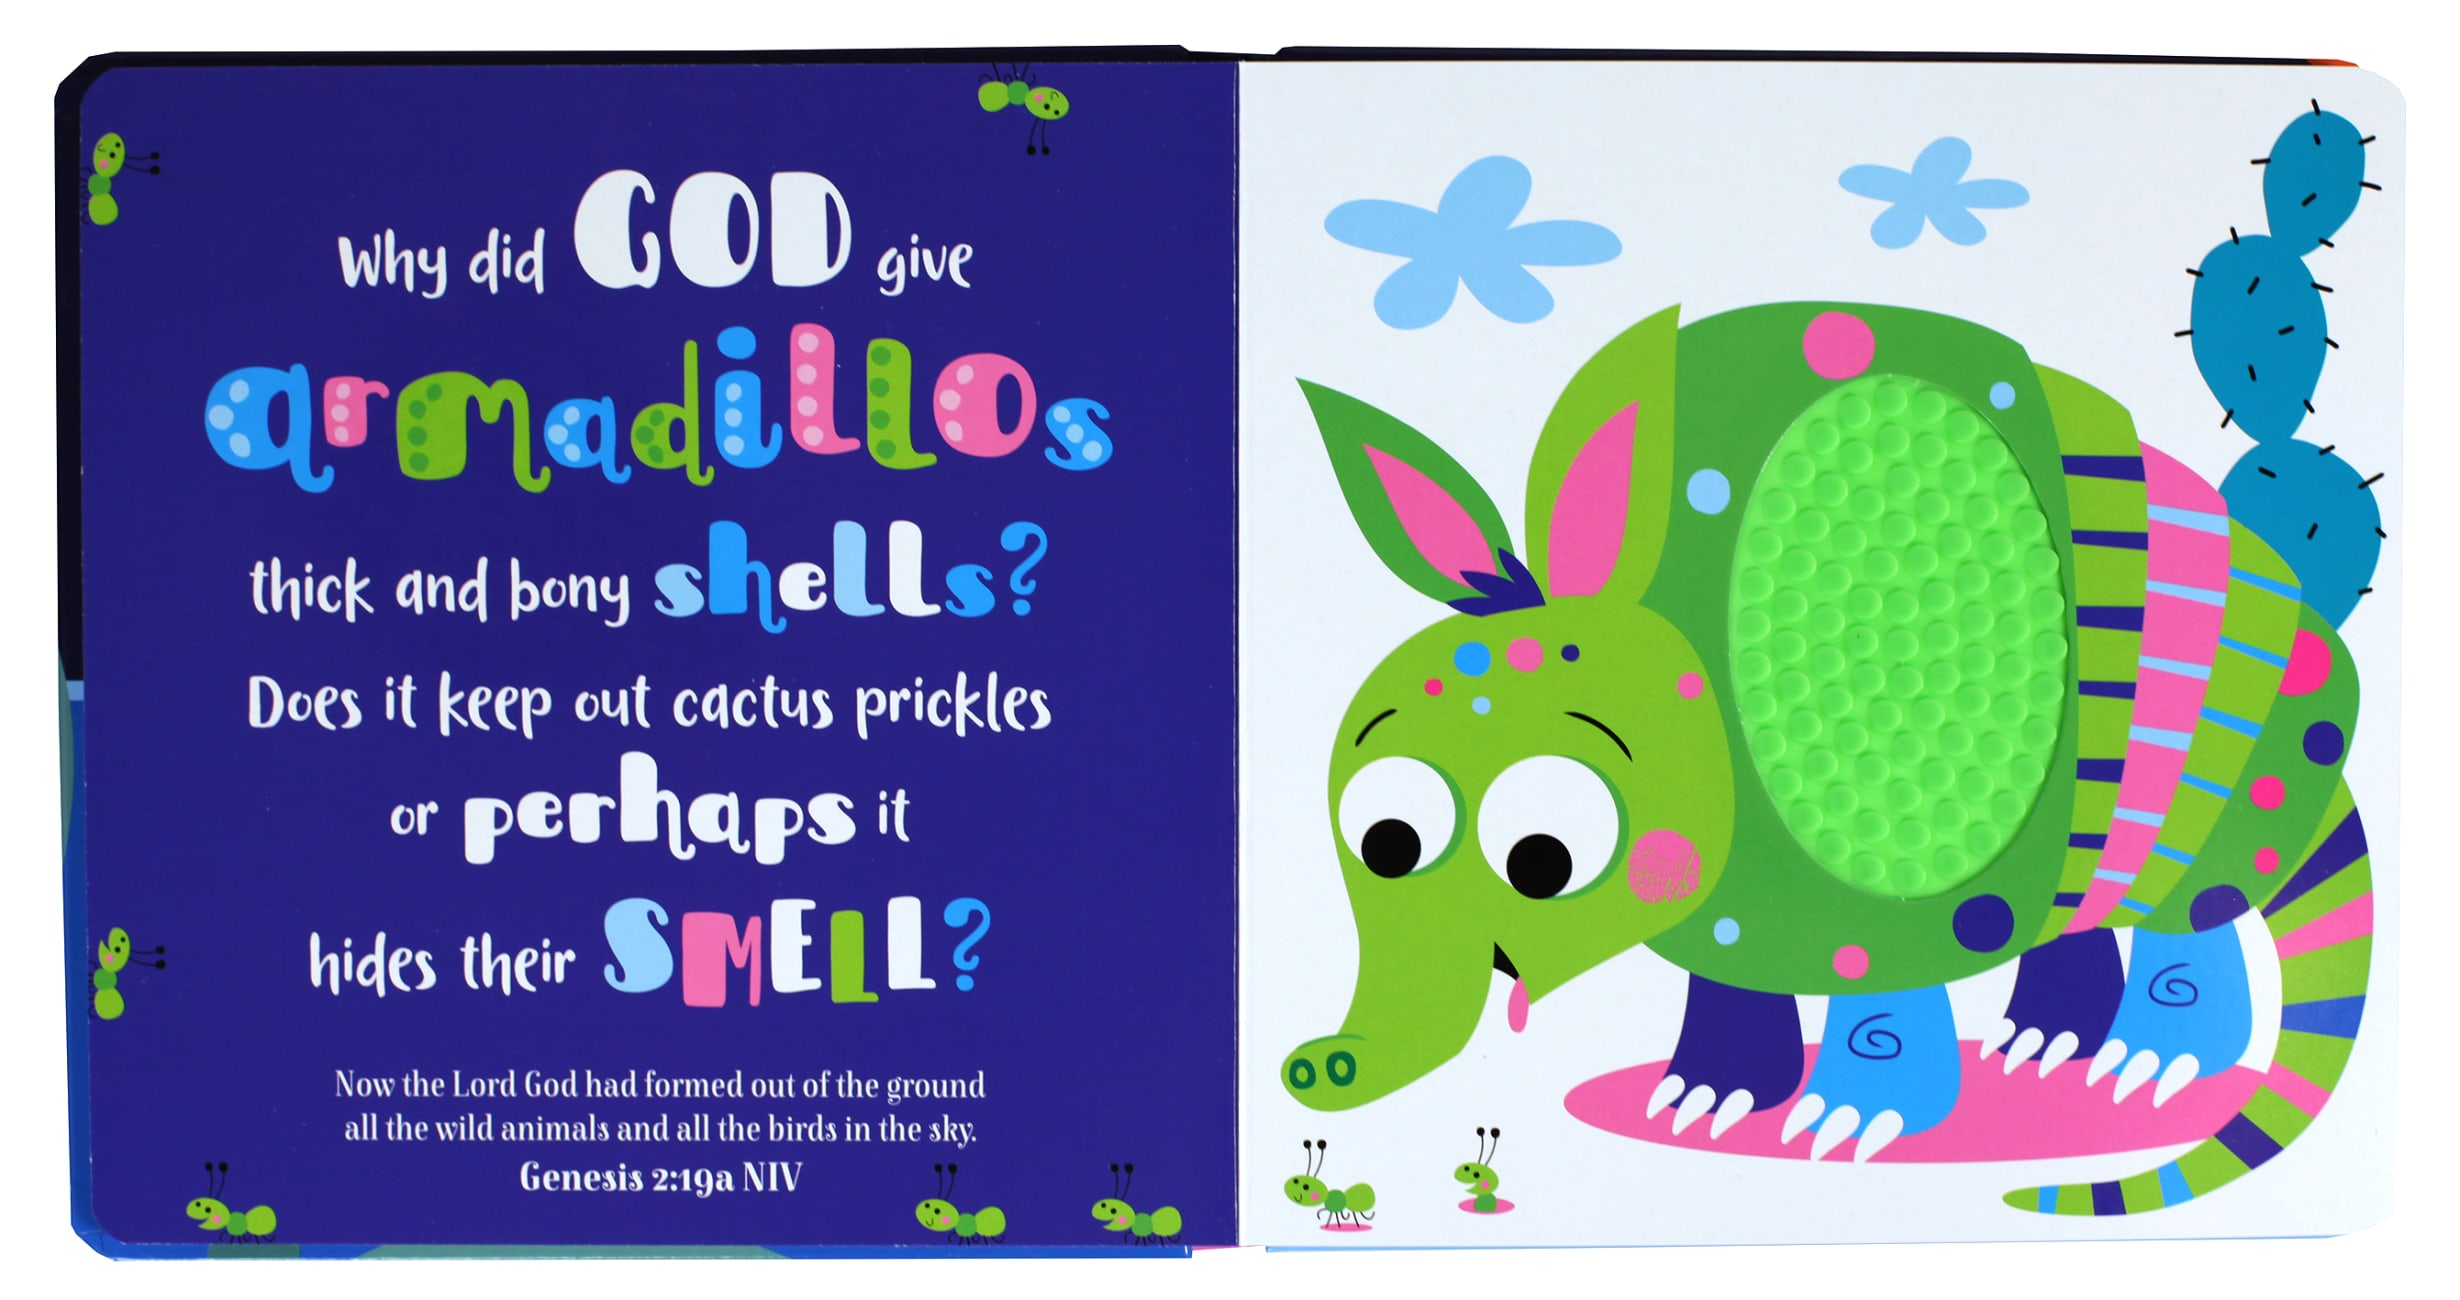 The Funniest Animals God Ever Made Board Book